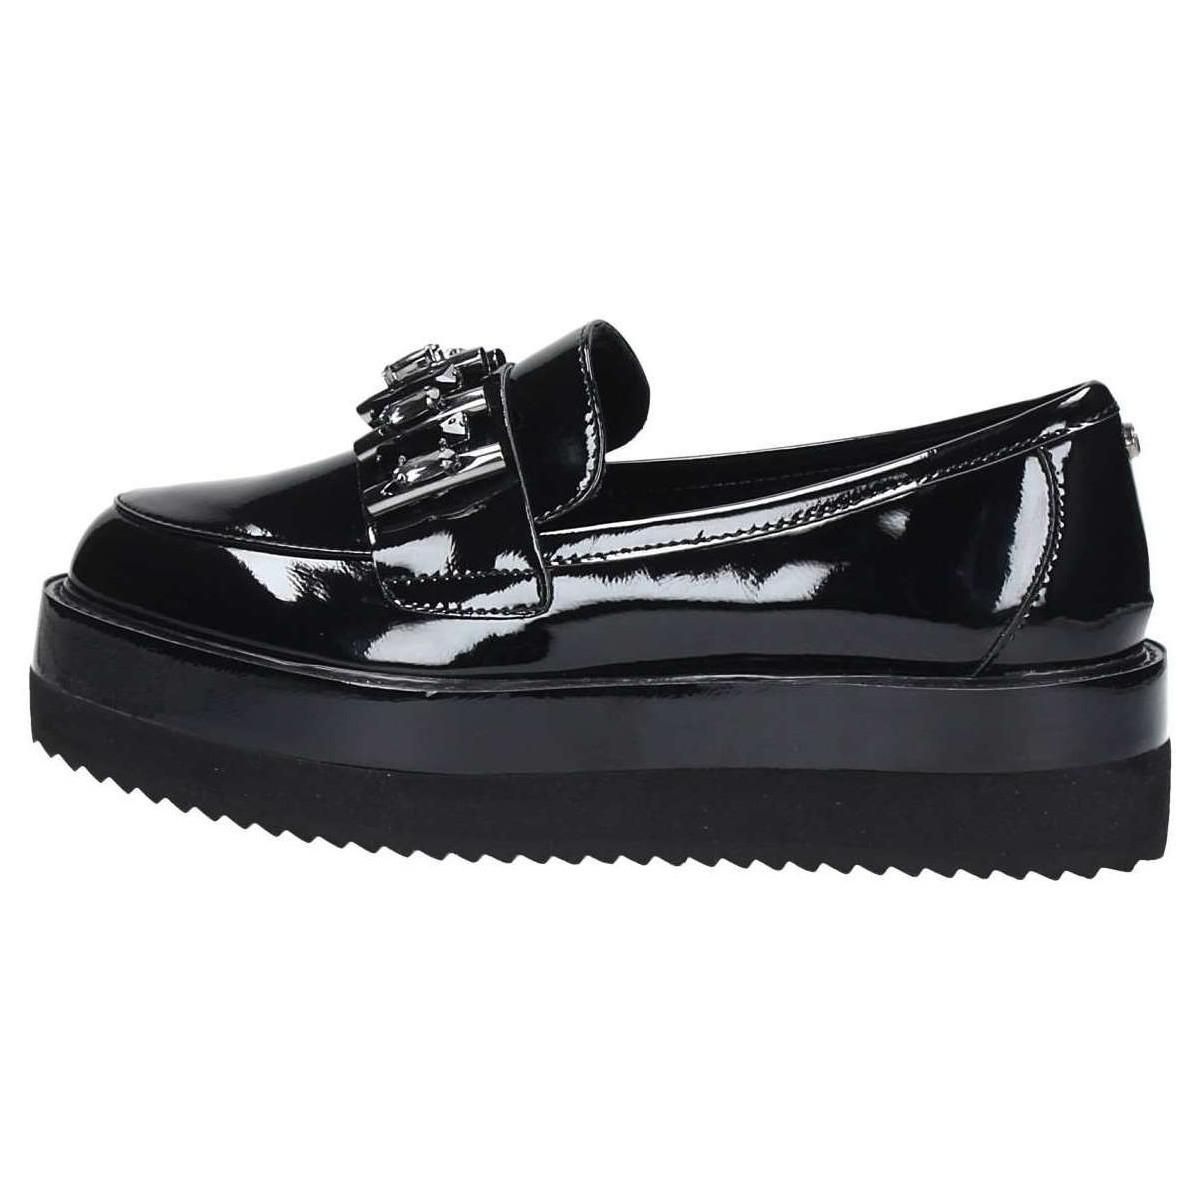 guess women's loafers